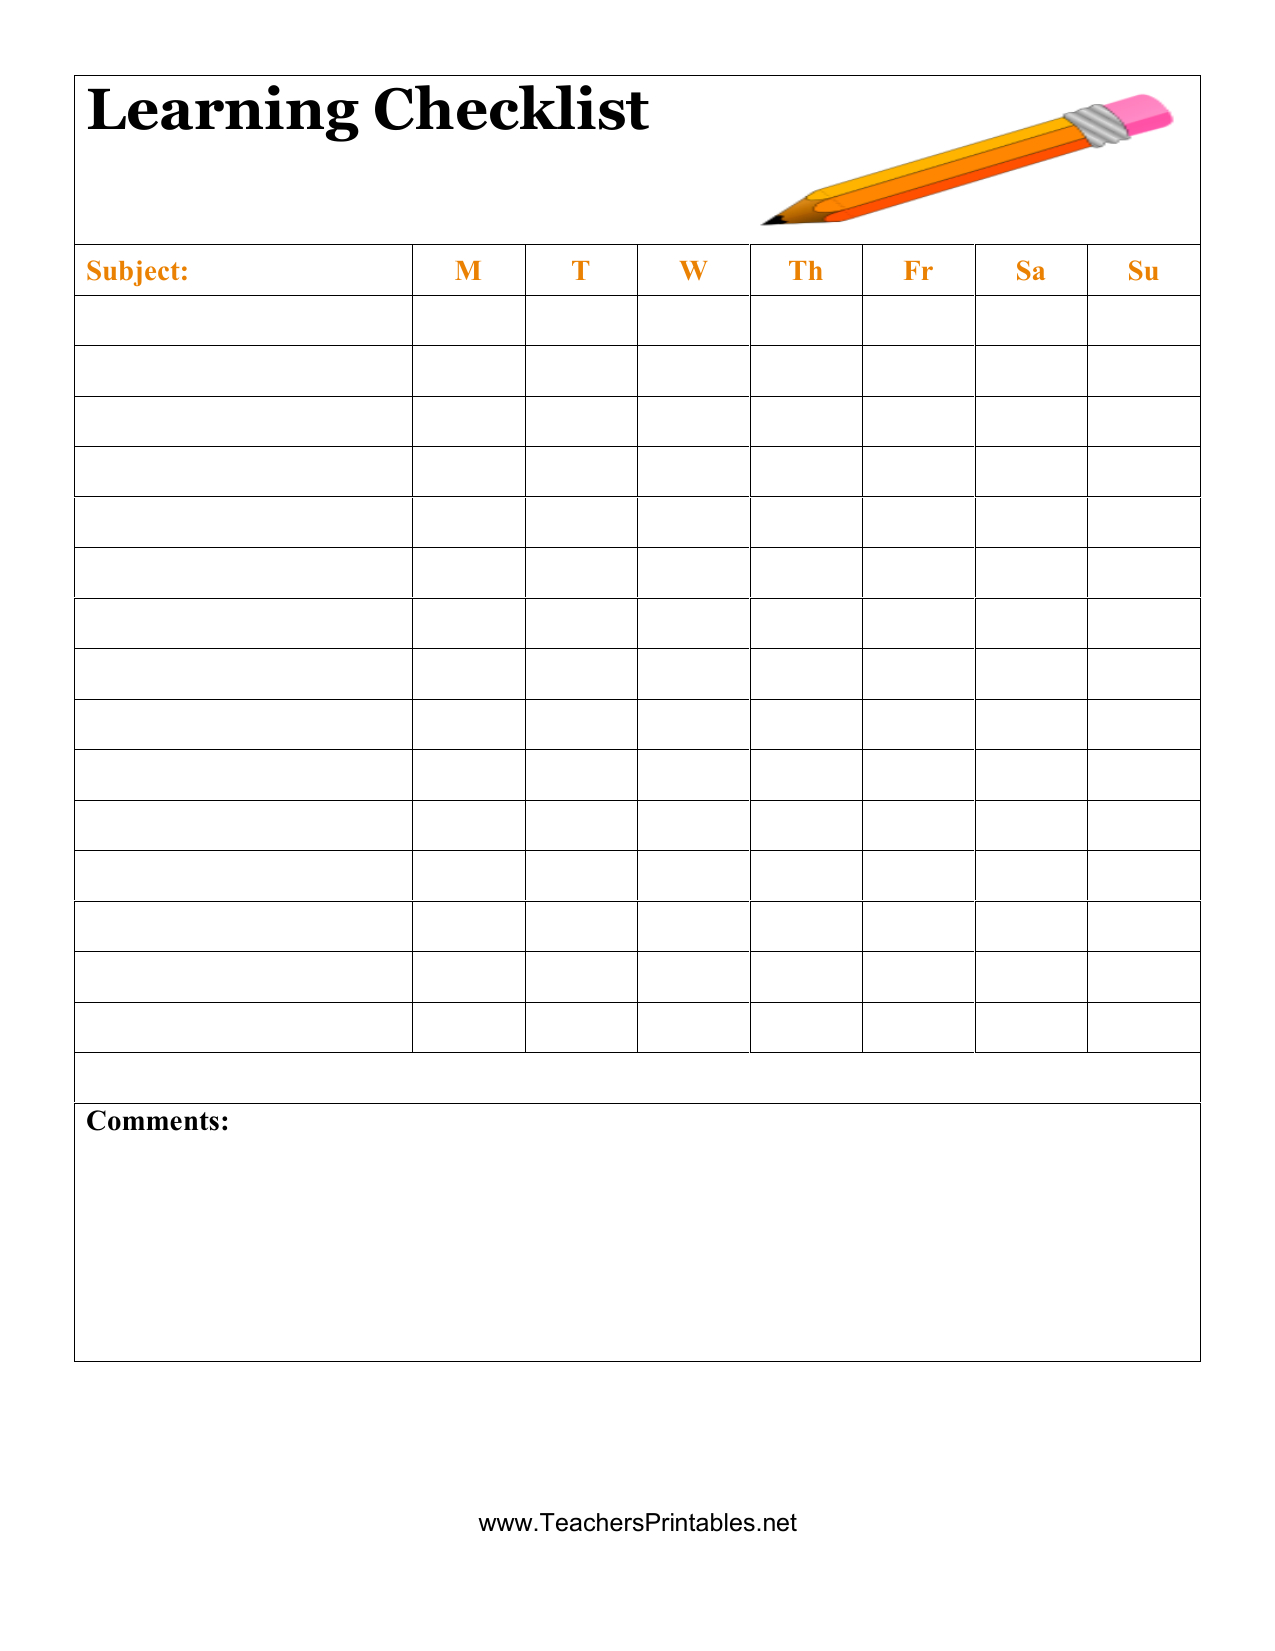 Download Student Checklist Template | Excel | Pdf | Rtf Intended For Blank Checklist Template Pdf